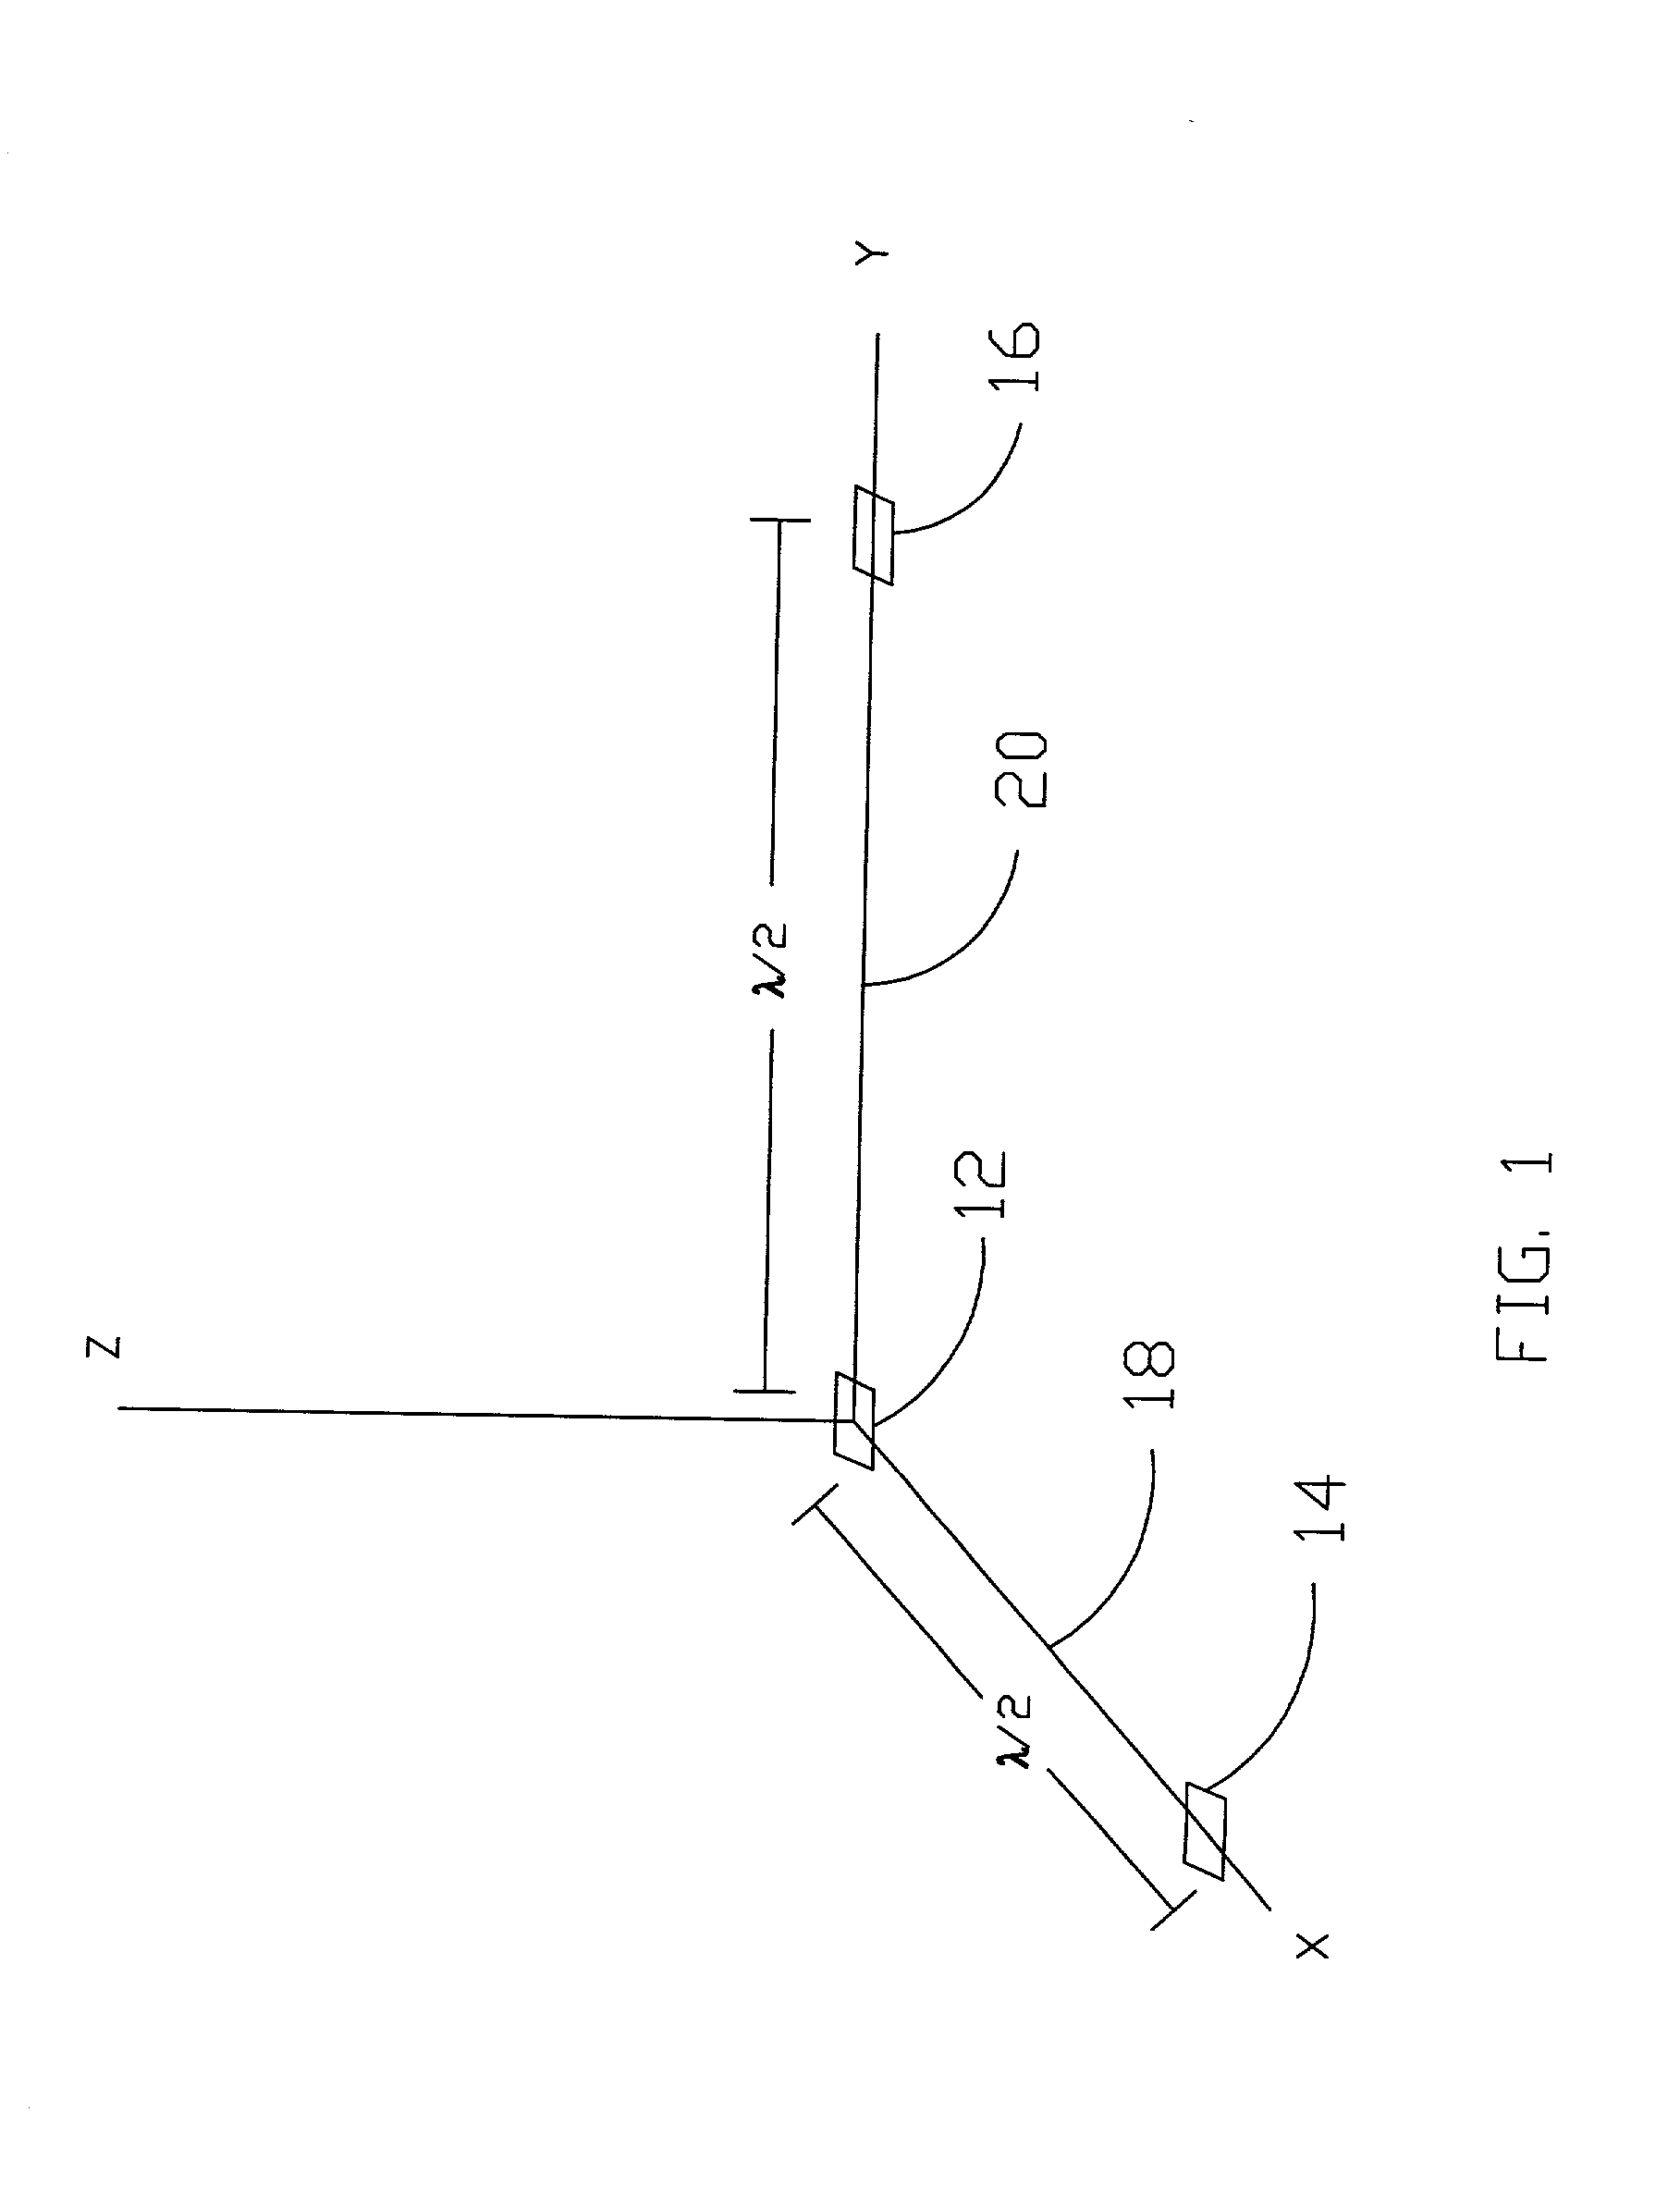 Passive tracking system and method